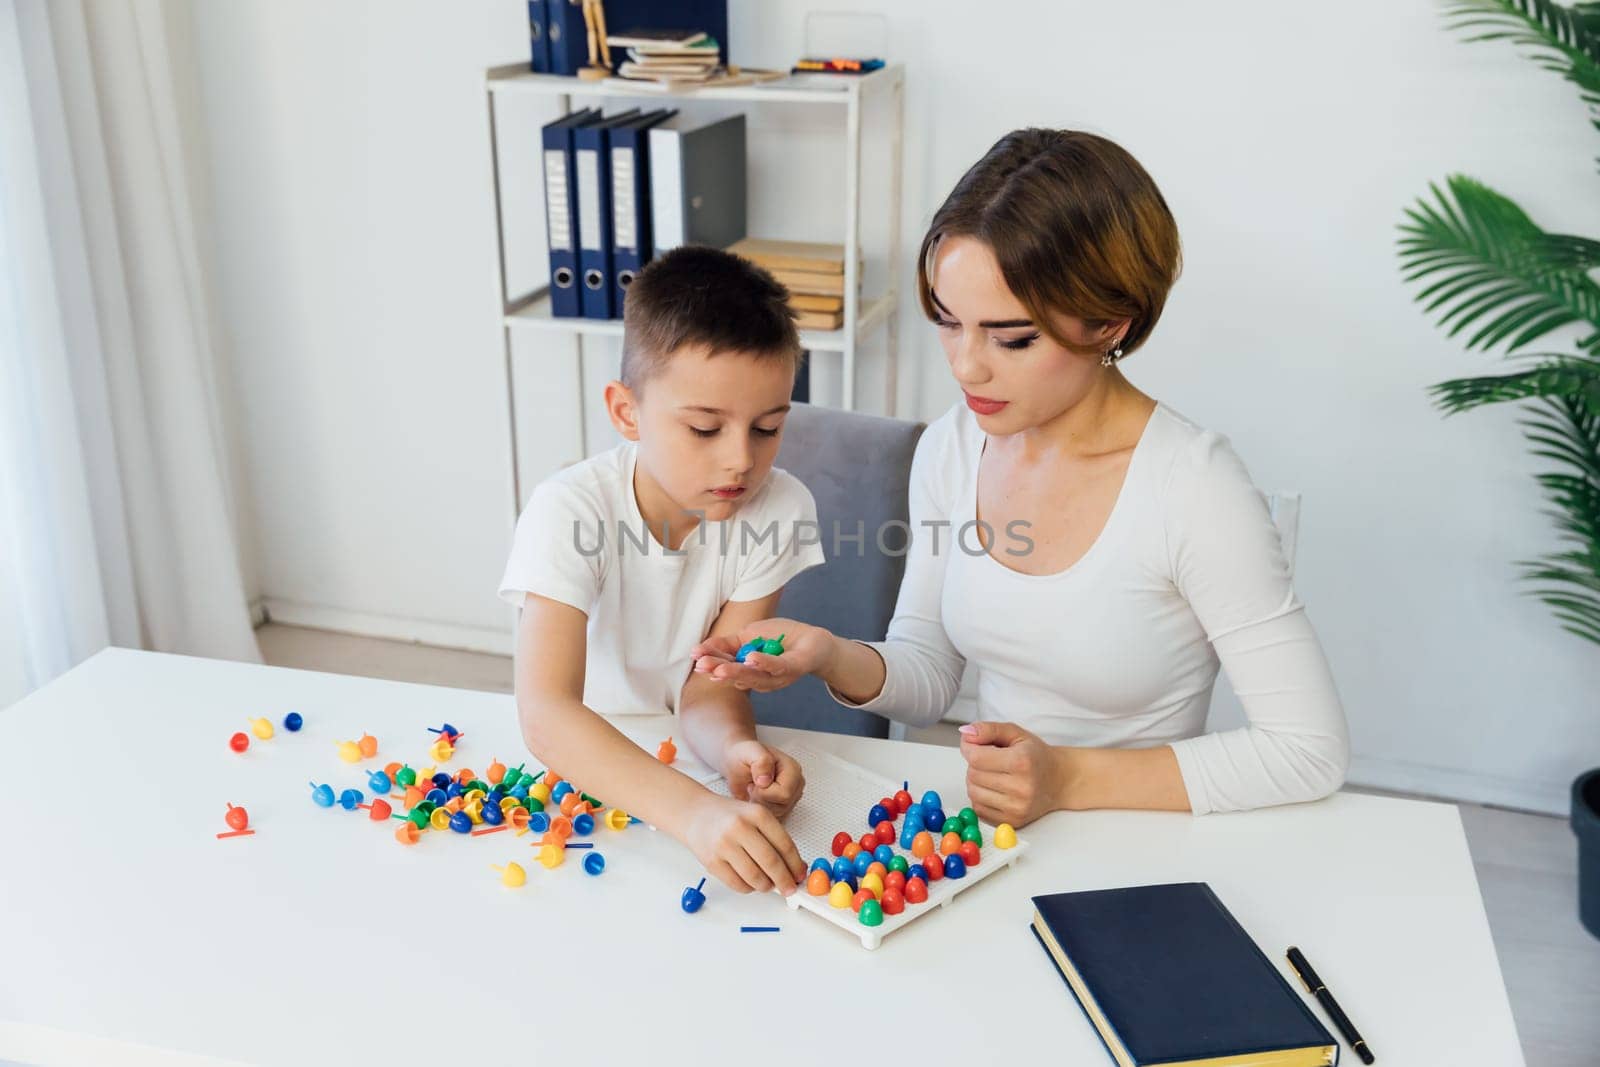 in the psychologist's office educational games work with the child fine motor skills mosaic